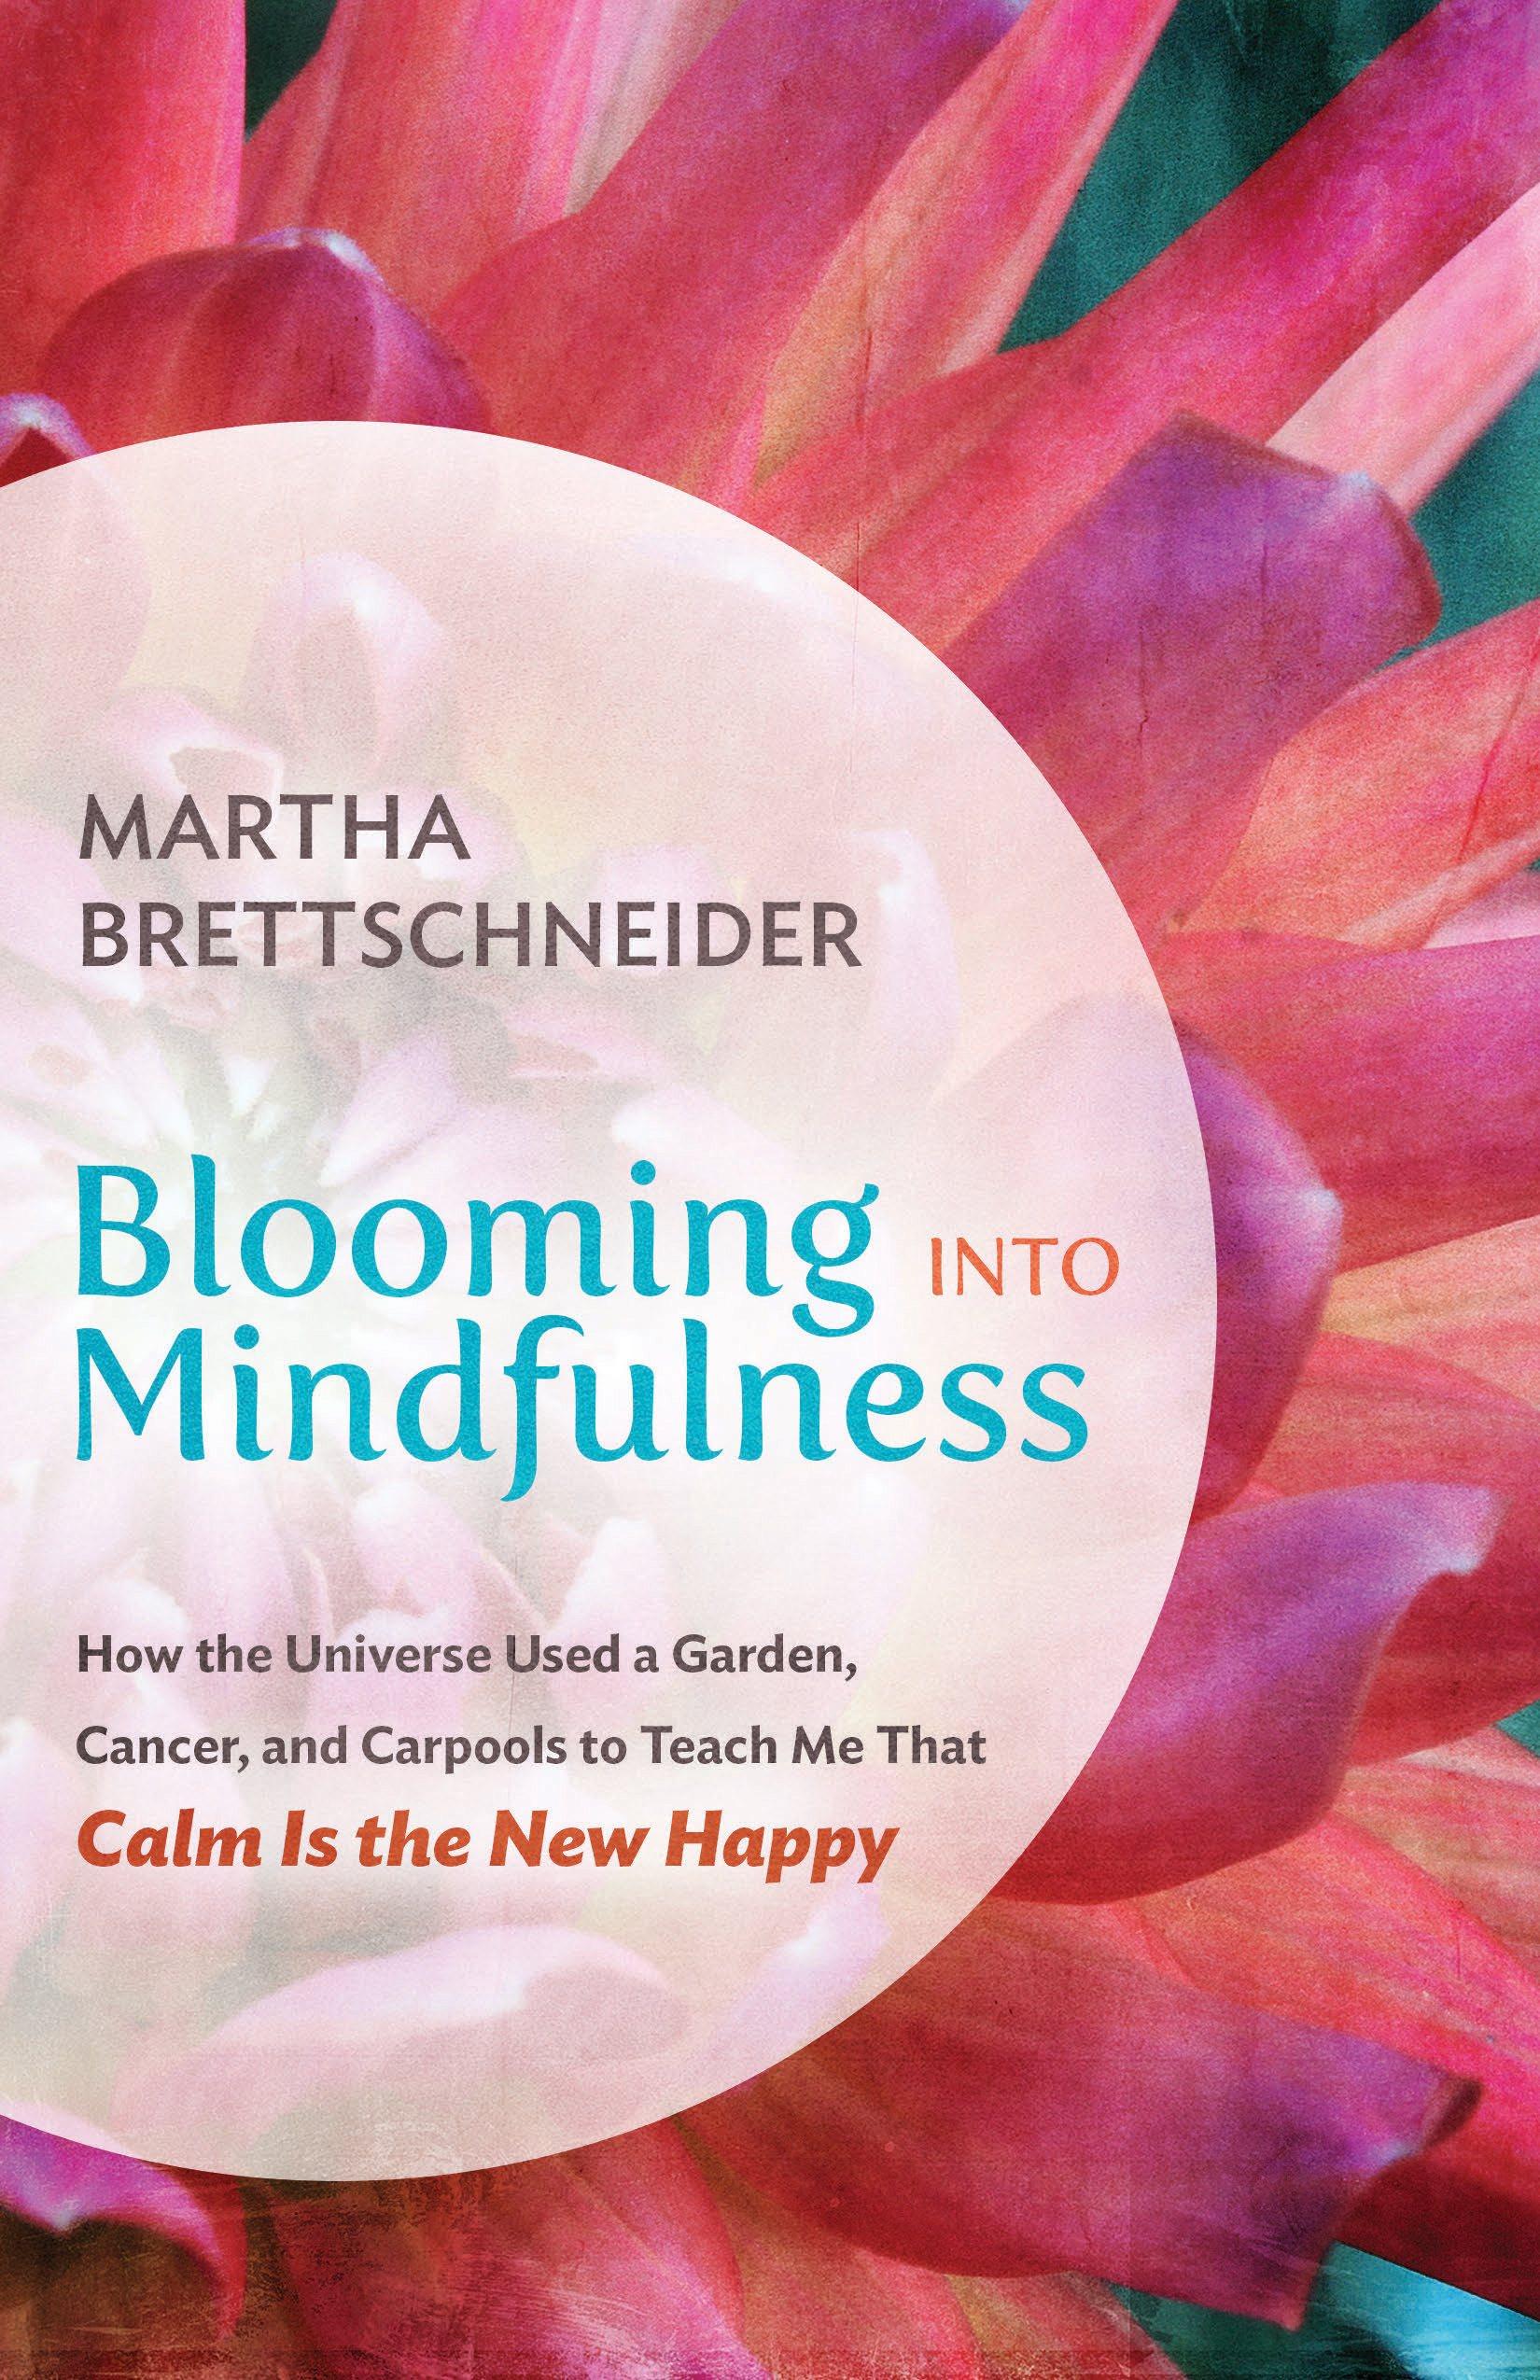 Blooming into Mindfulness: How the Universe Used a Garden, Cancer, and Carpools to Teach Me that Calm Is the New Happy